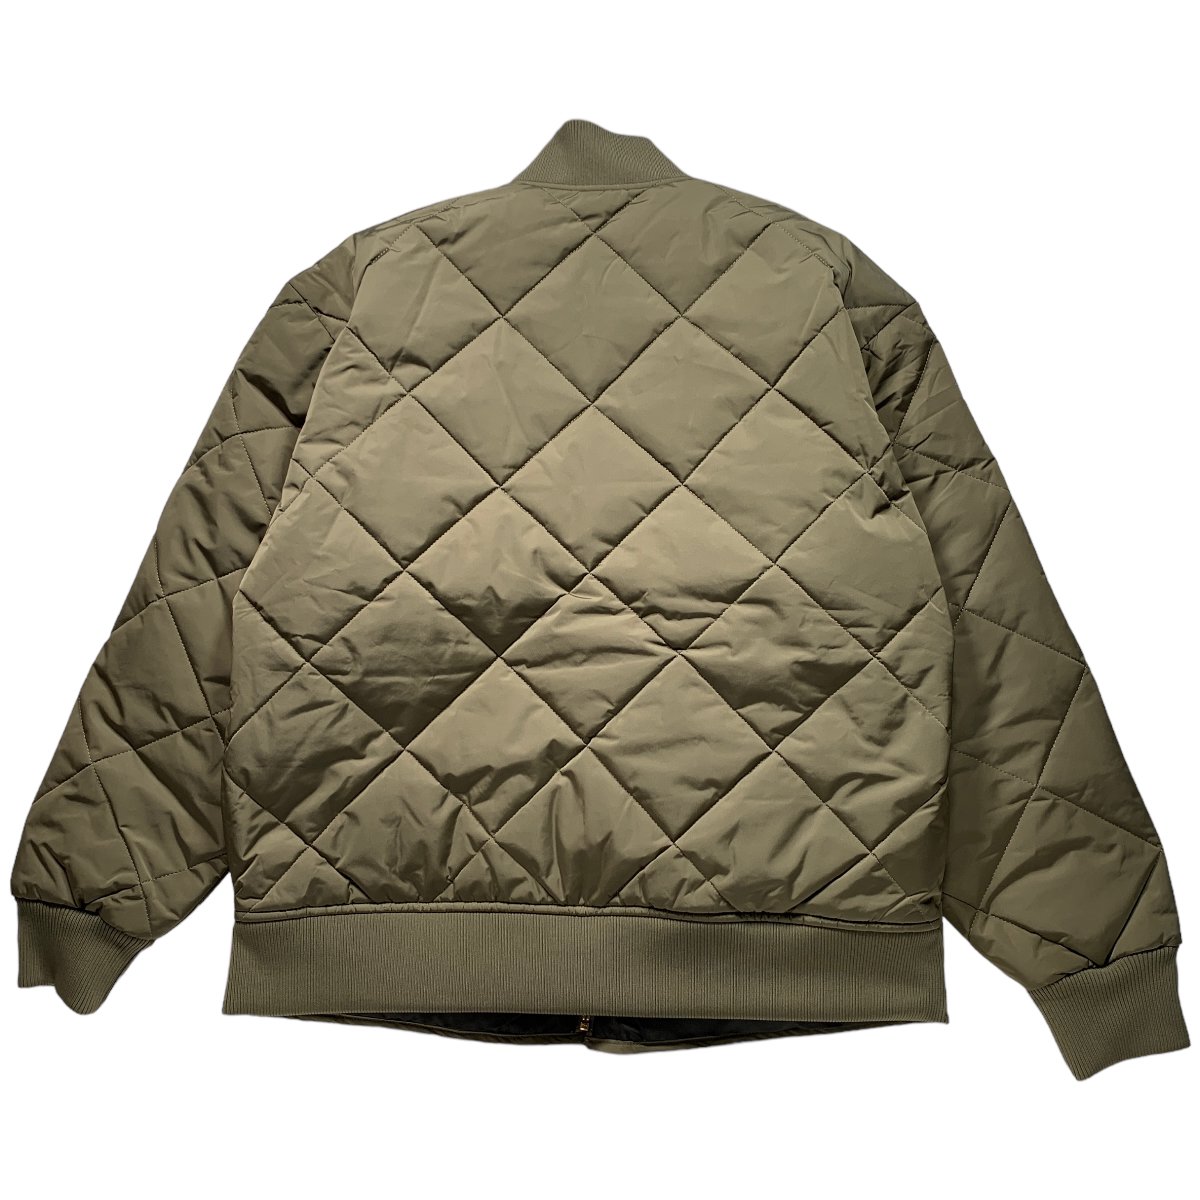 WACKOMARIA《ワコマリア》DICKES / QUILTED JACKET(DICKIES-WM-BL08 